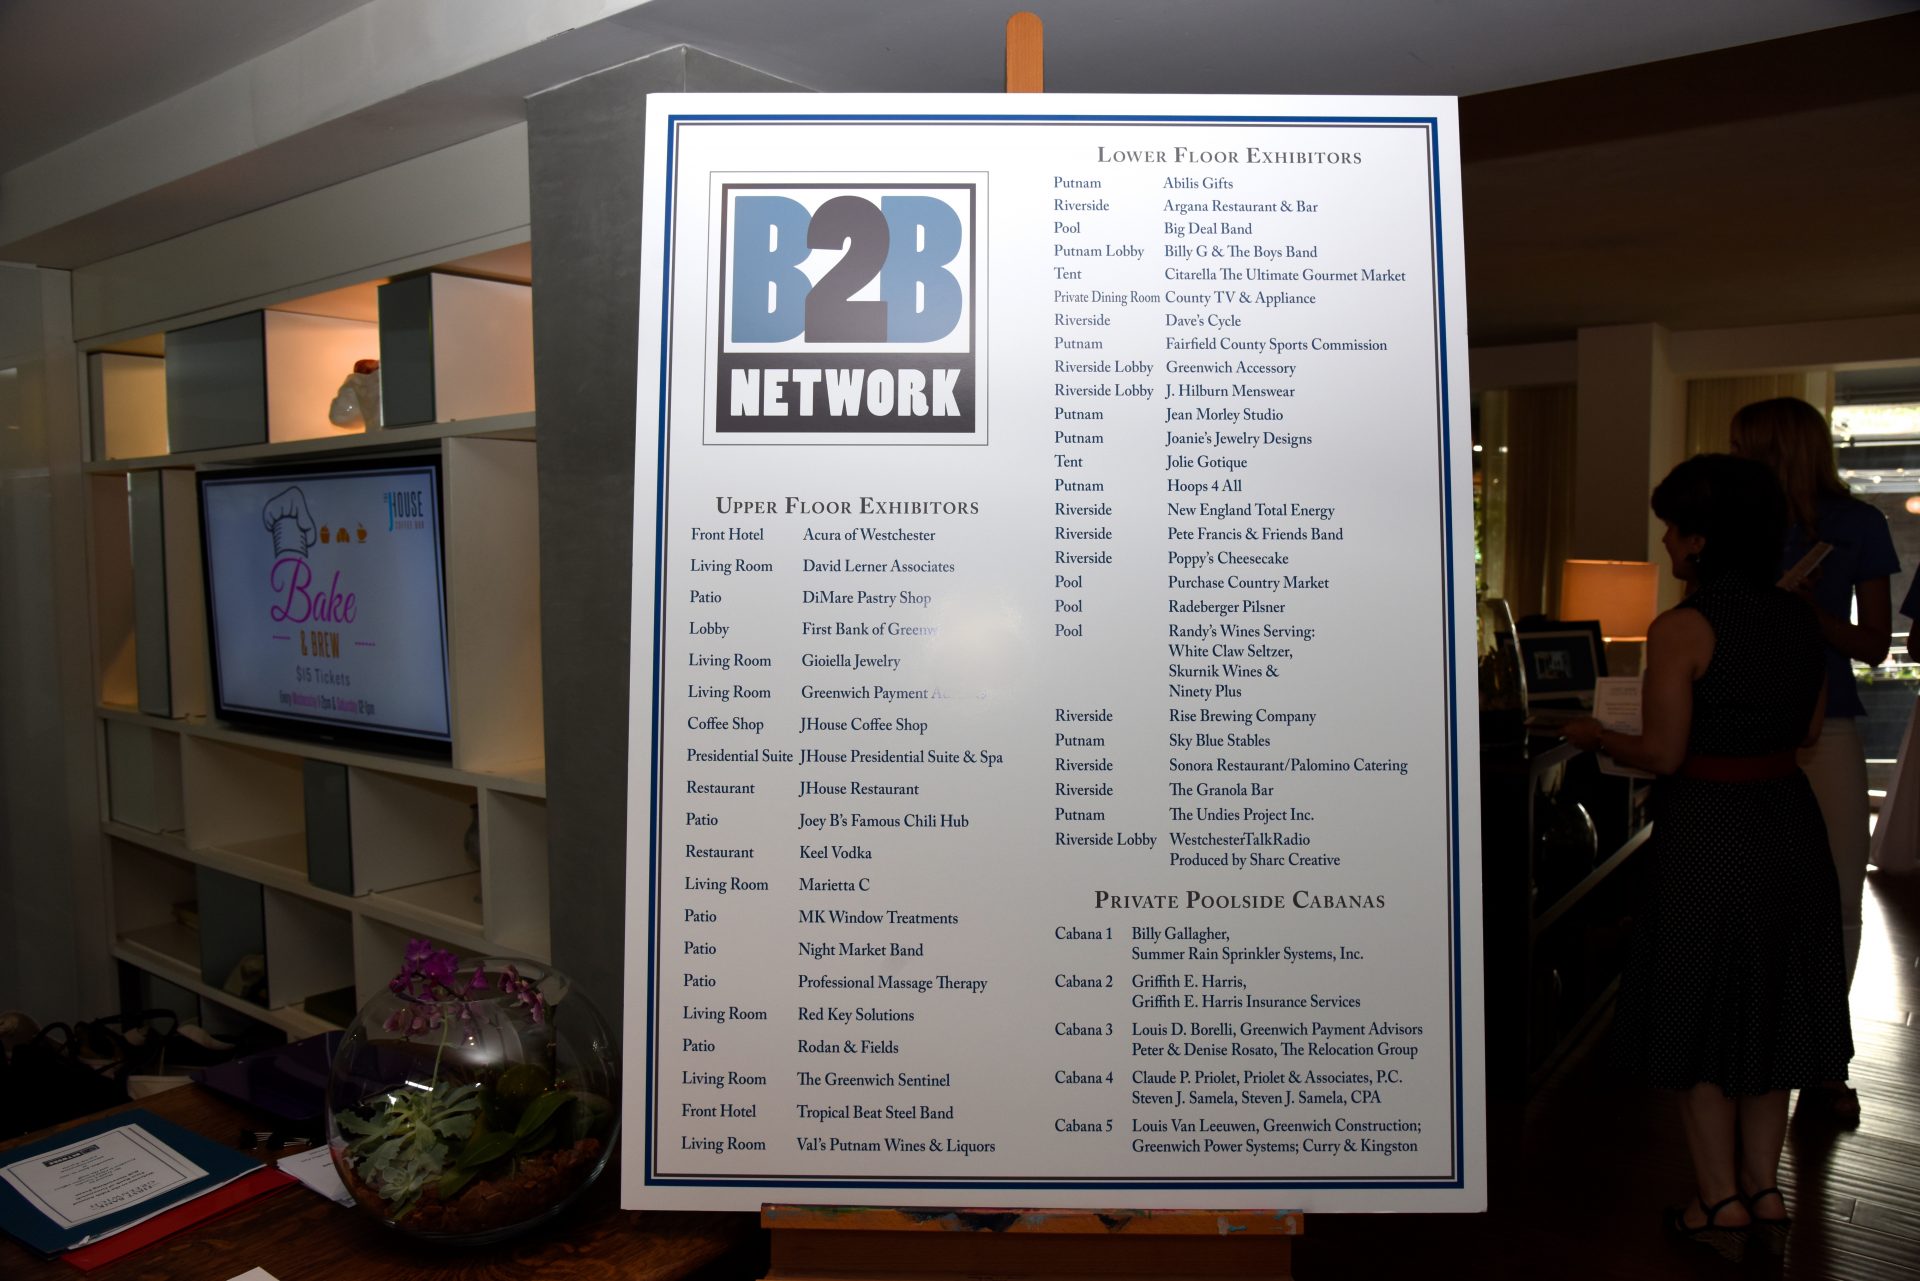 A poster detailing the various B2B Network Exhibitions and their locations